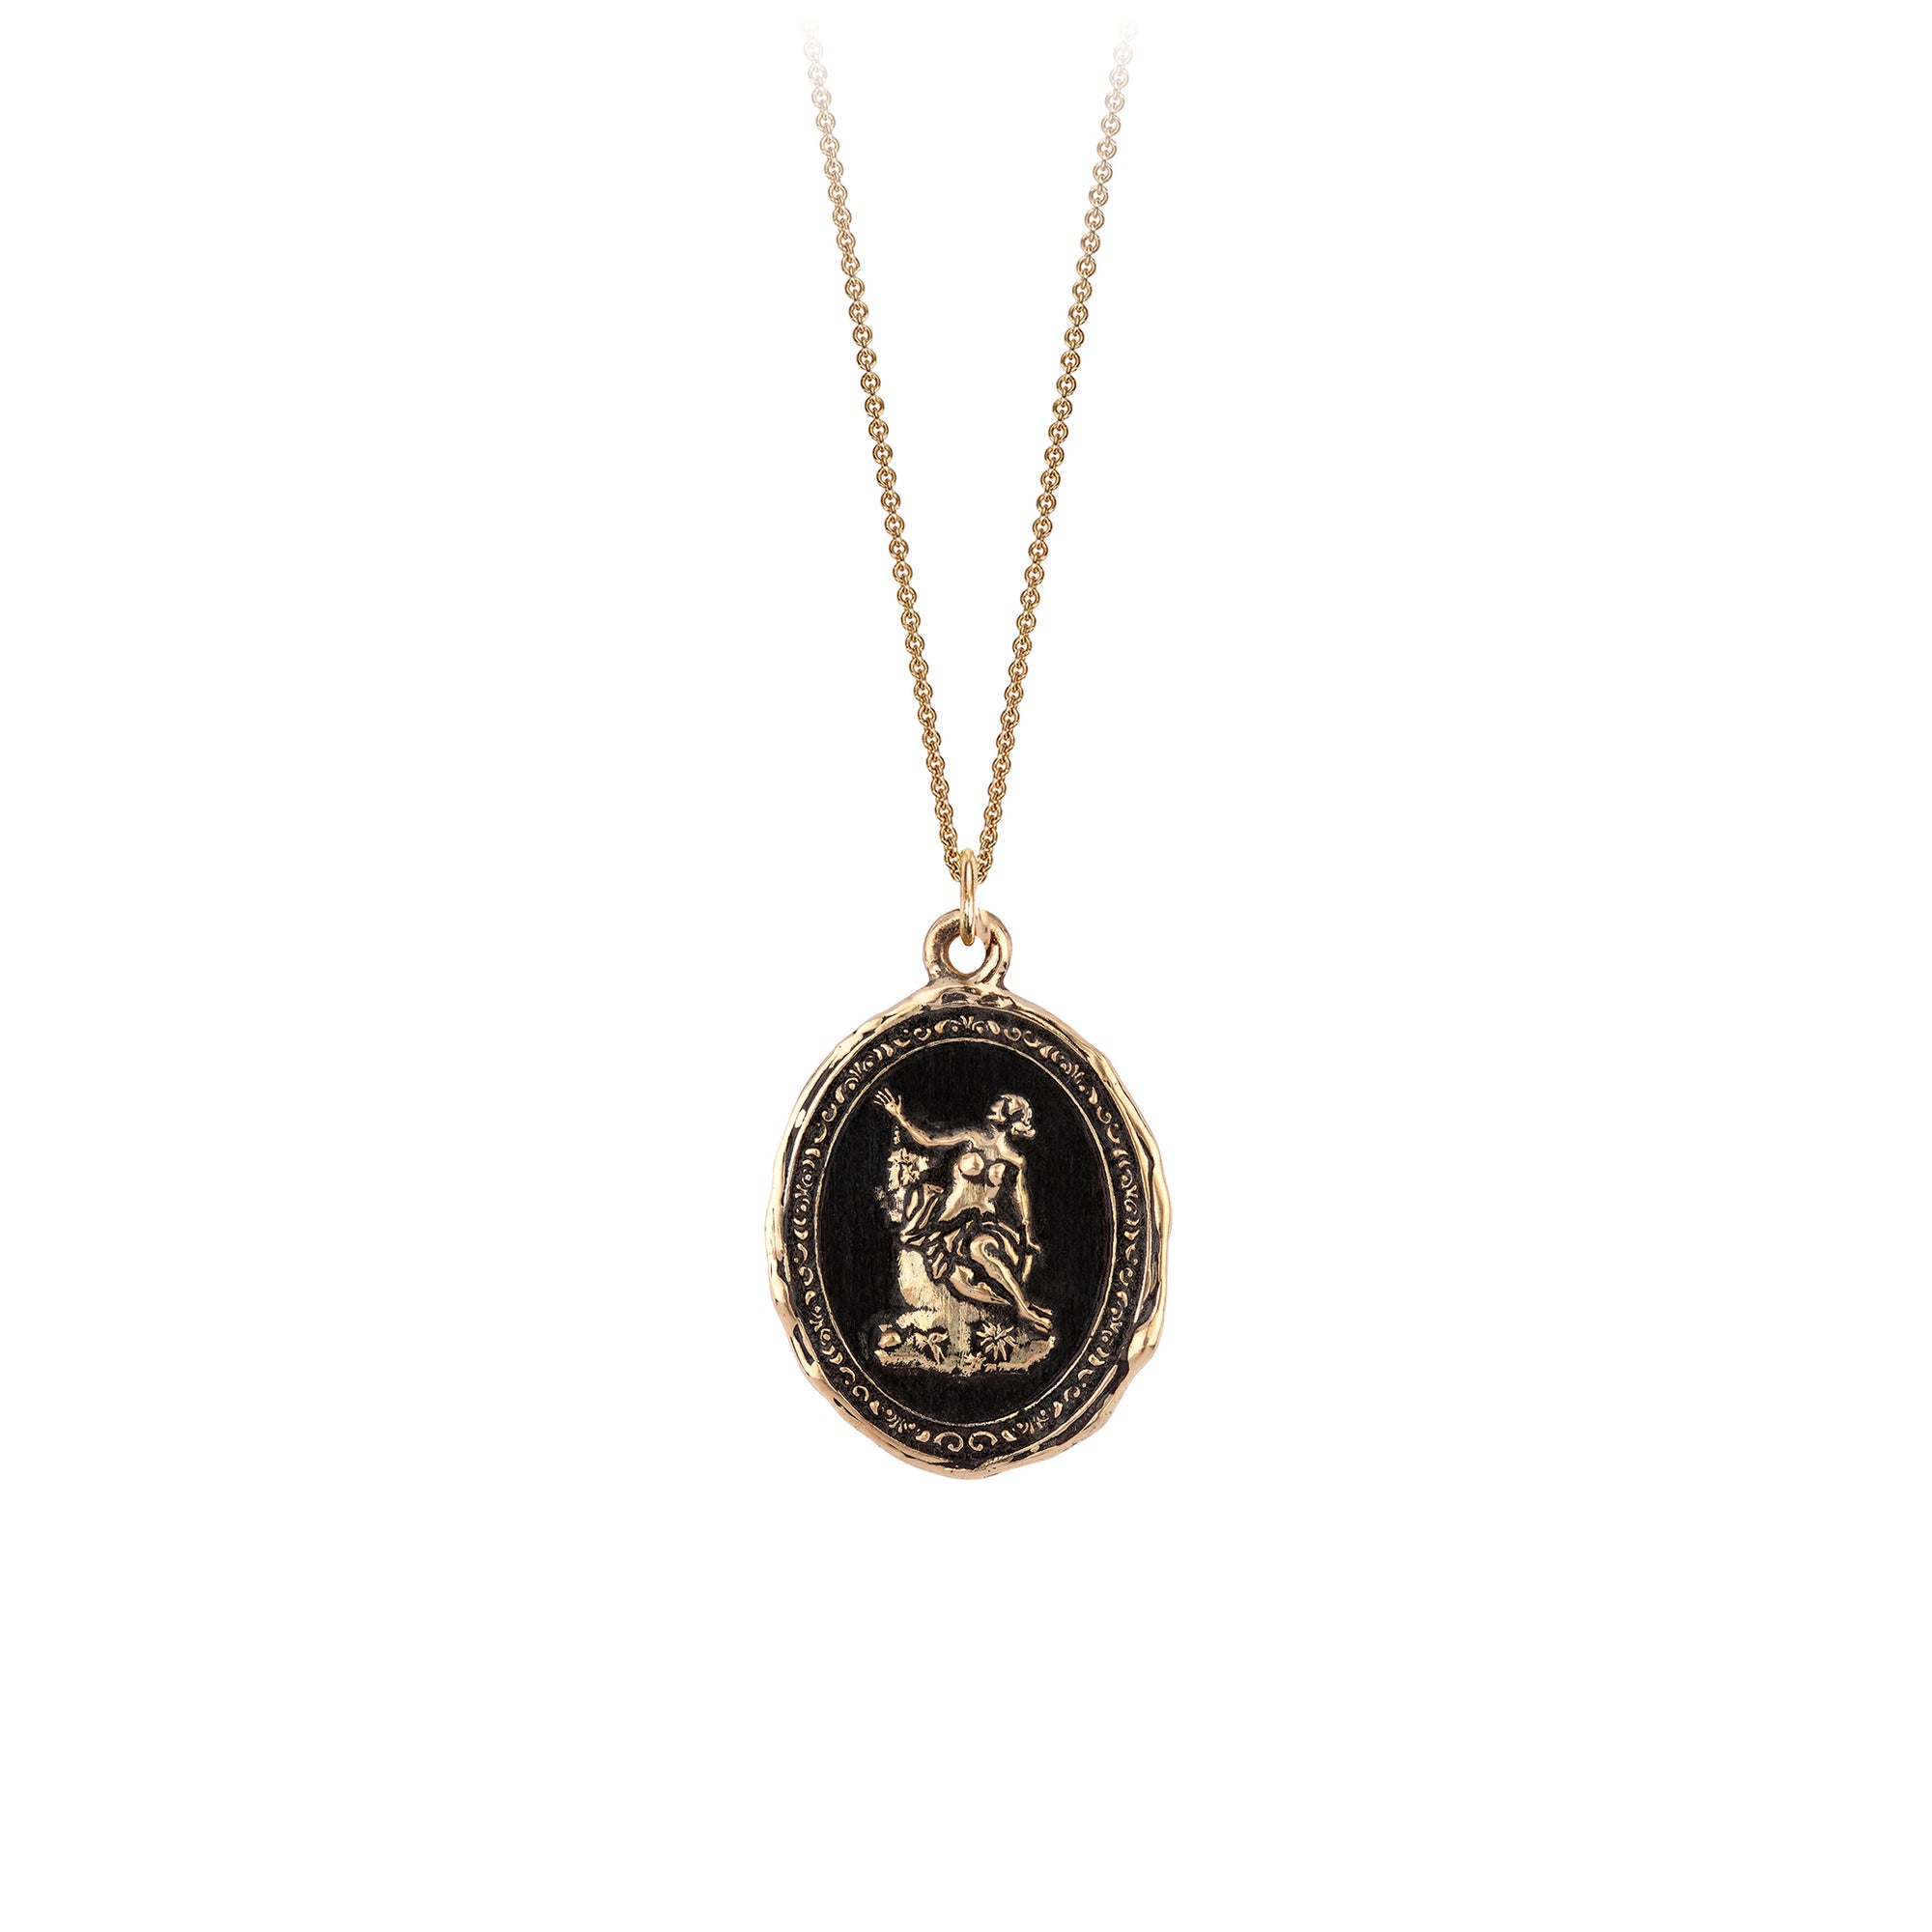 A 14k gold chain featuring our 14k gold Andromeda goddess talisman.